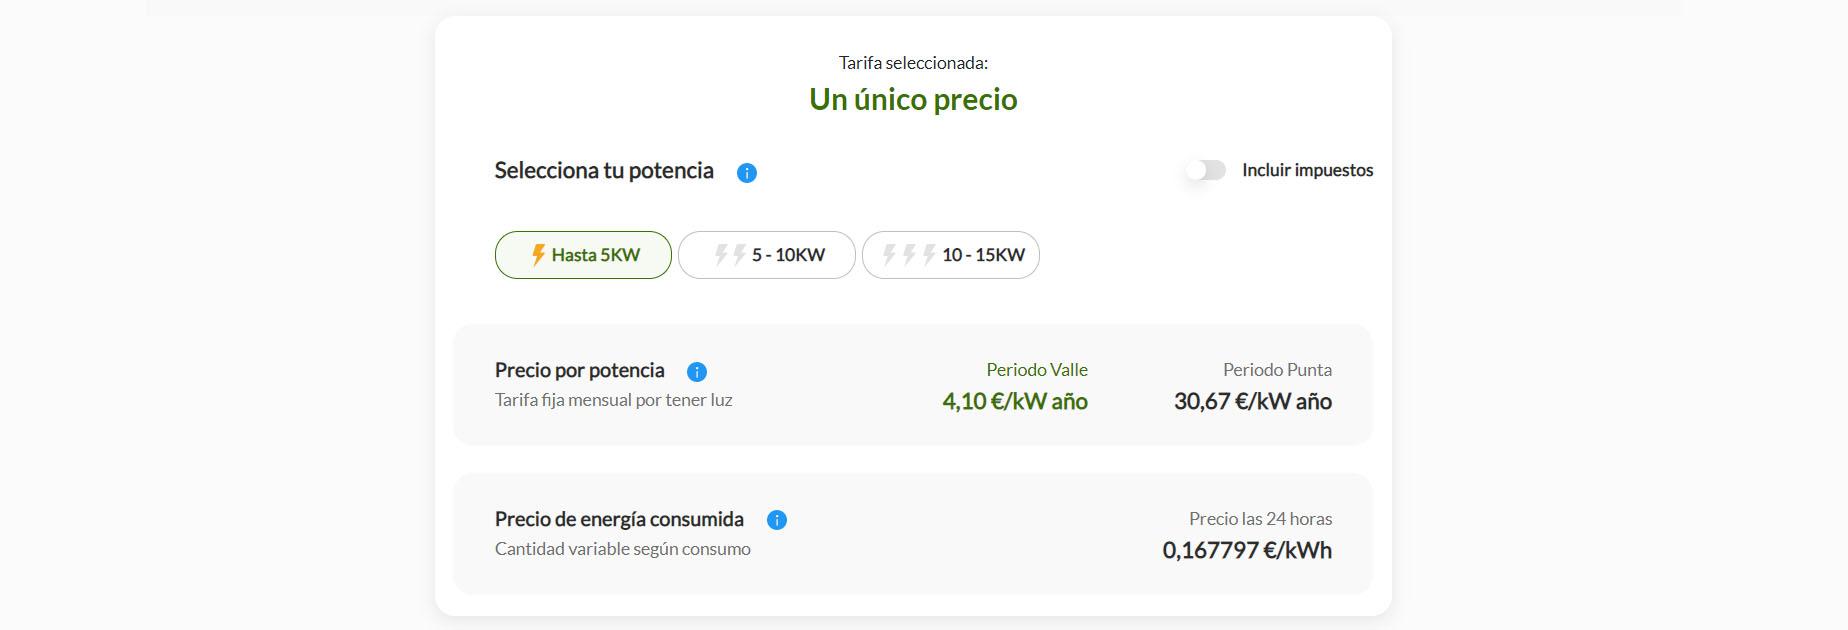 Price of the Iberdrola electricity rate